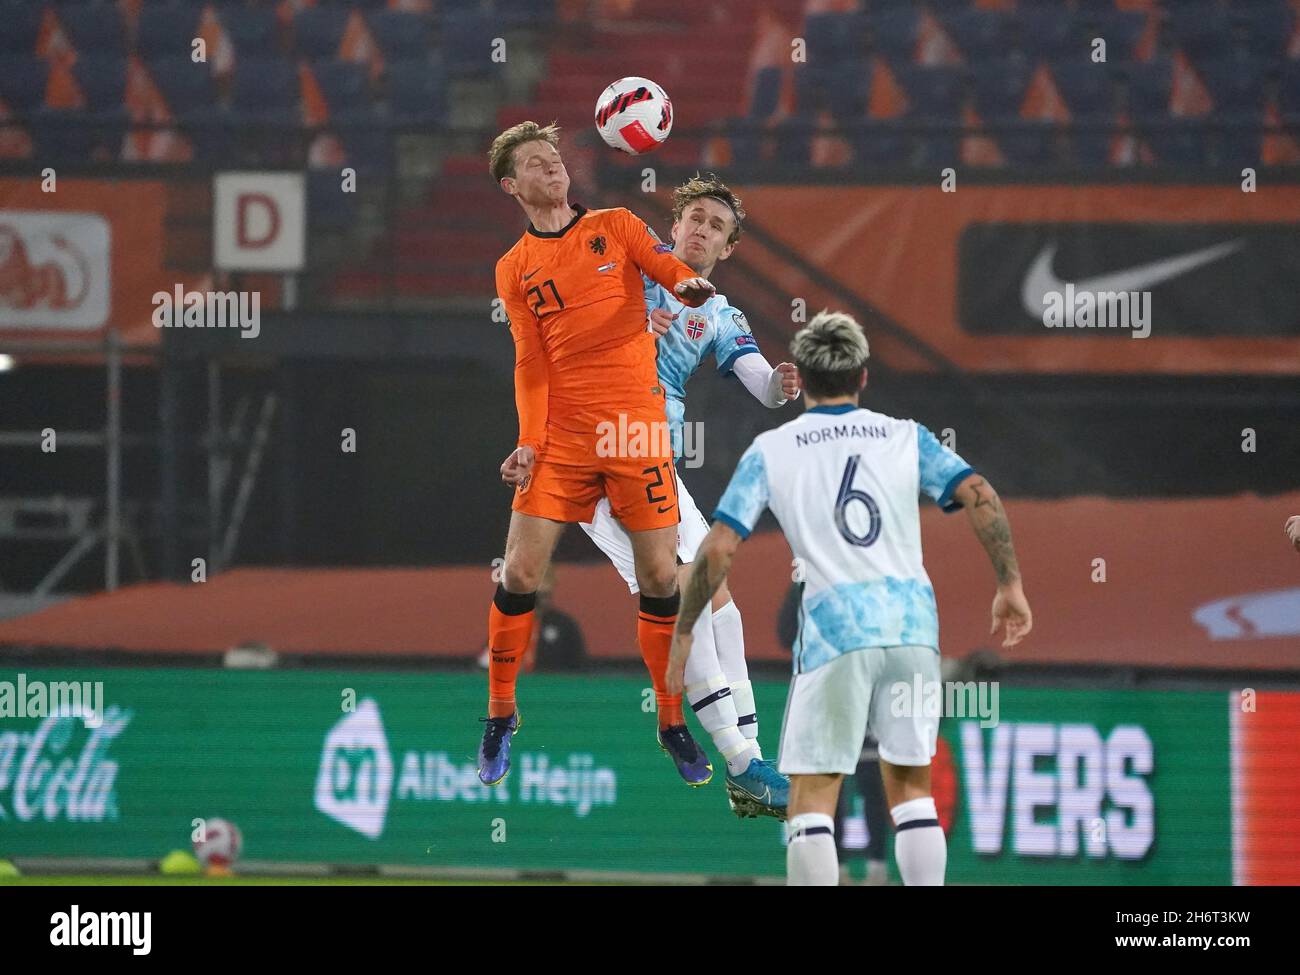 Rotterdam, Netherlands, November 17, 2021, Frenkie de Jong of the Netherlands in action during Fifa World Cup Qatar 2022 Qualifying Round Netherlands vs Norway on November 17, 2021 at stadium De Kuip in Rotterdam, Netherlands Foto: SCS/Soenar Chamid/AFLO (HOLLAND OUT) Stock Photo